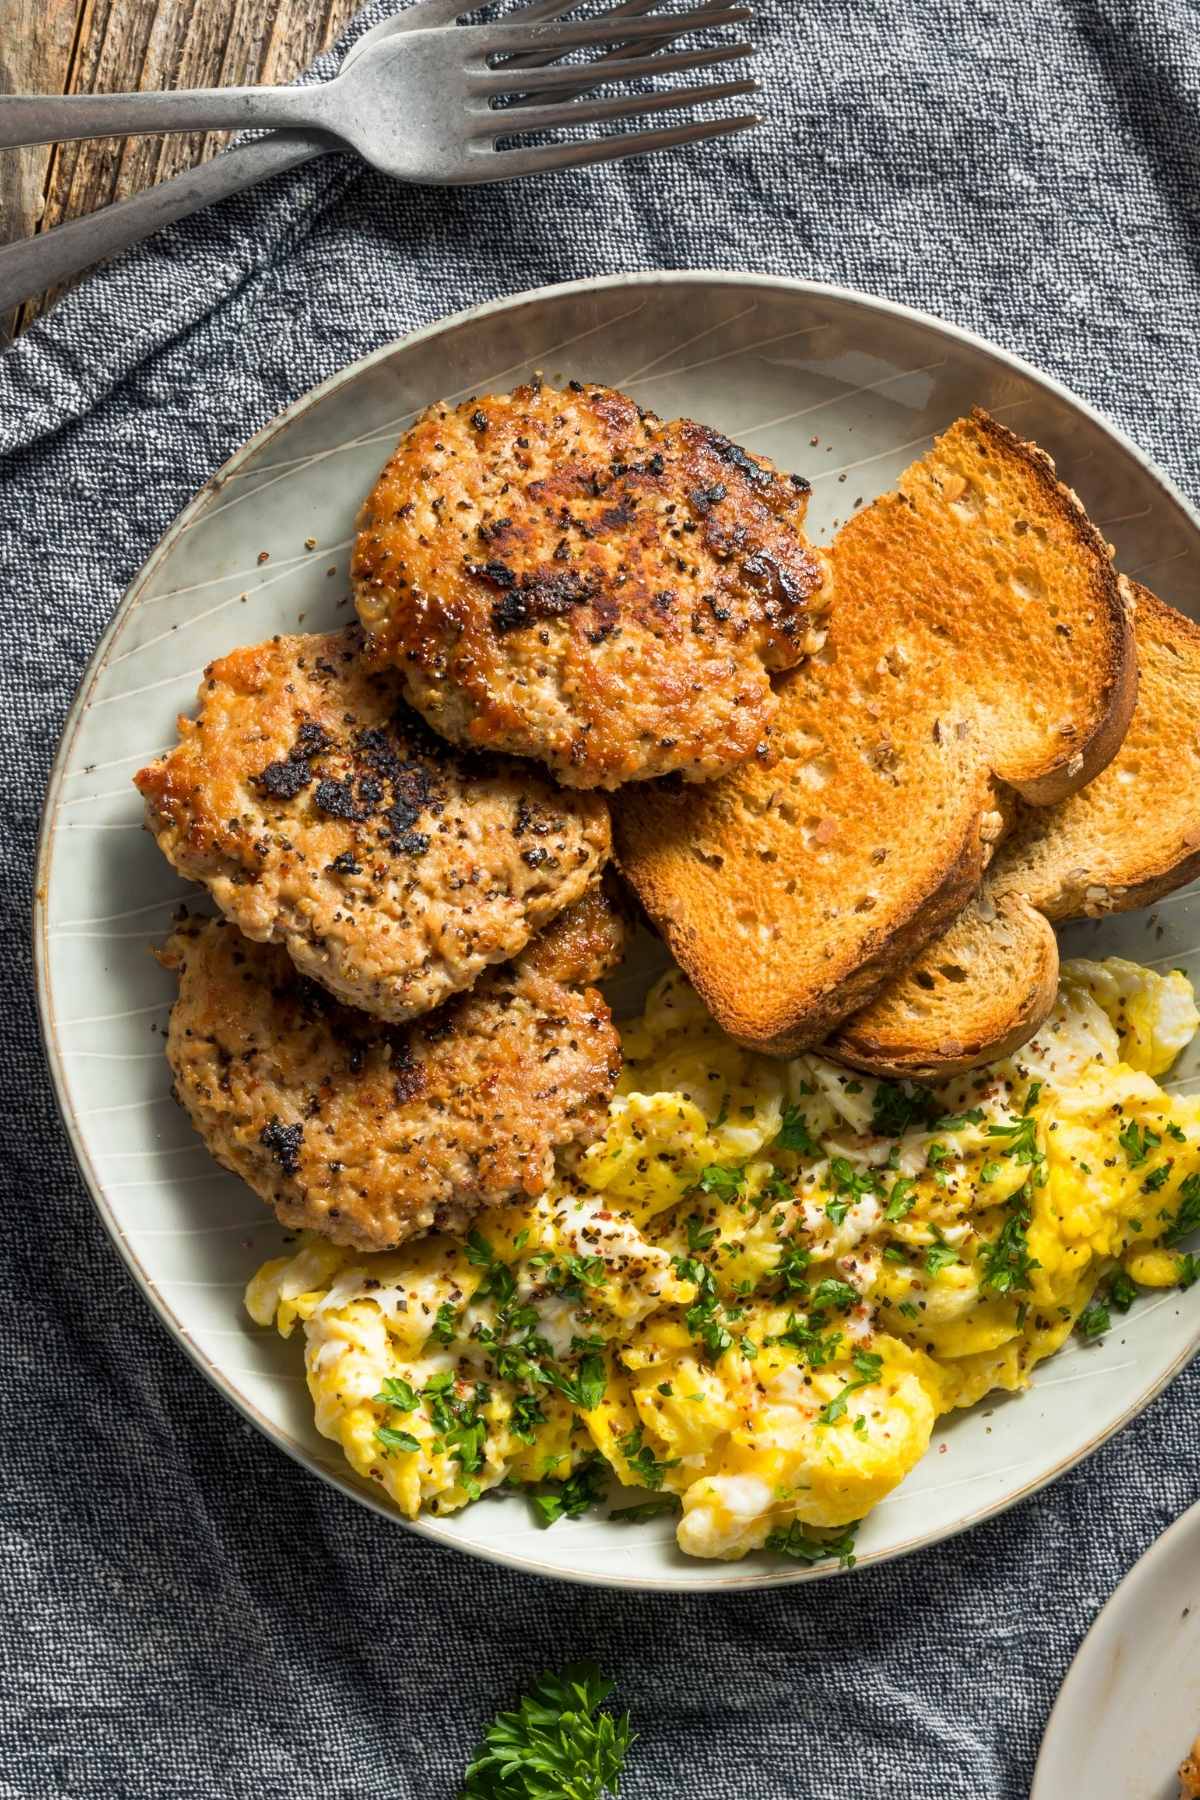 Combine ground pork with plenty of seasoning to create this simple and easy Breakfast Sausage recipe in the comfort of your home!